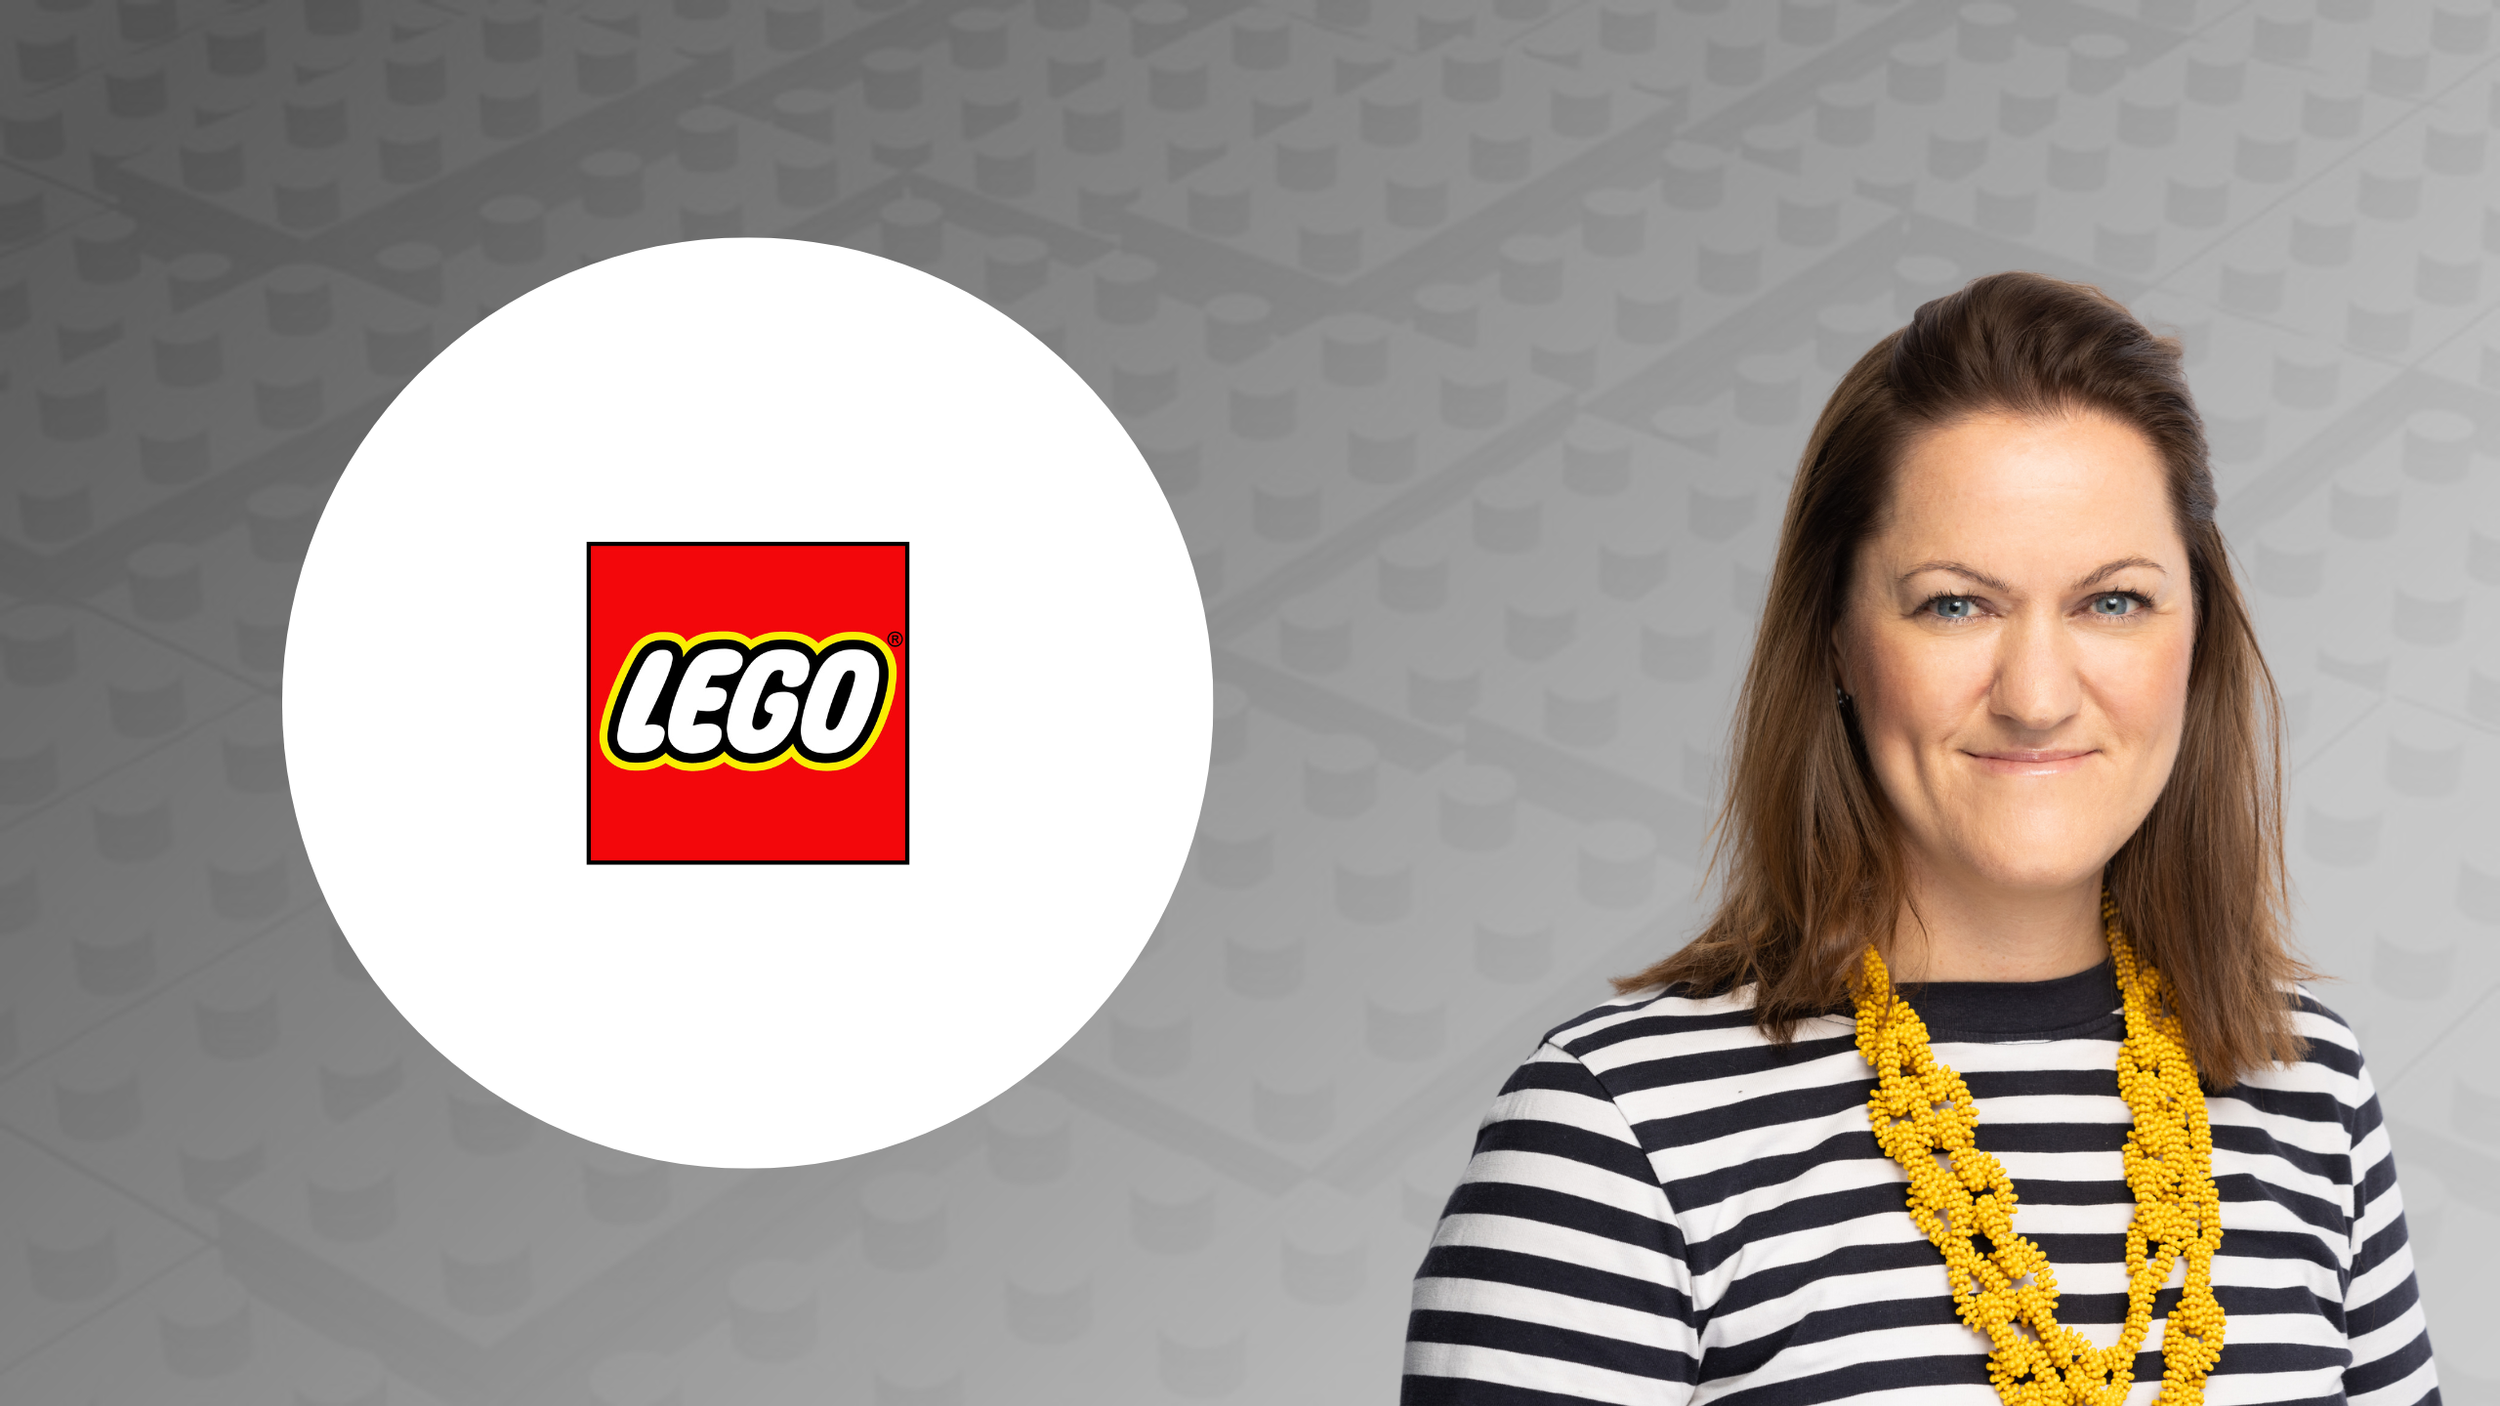 HR Innovation Roundtable at The LEGO Headquarters. 27 & 28 February 2023. Billund, Denmark HR Leaders is a digital media platform Shaping the Future of Work, for business and for